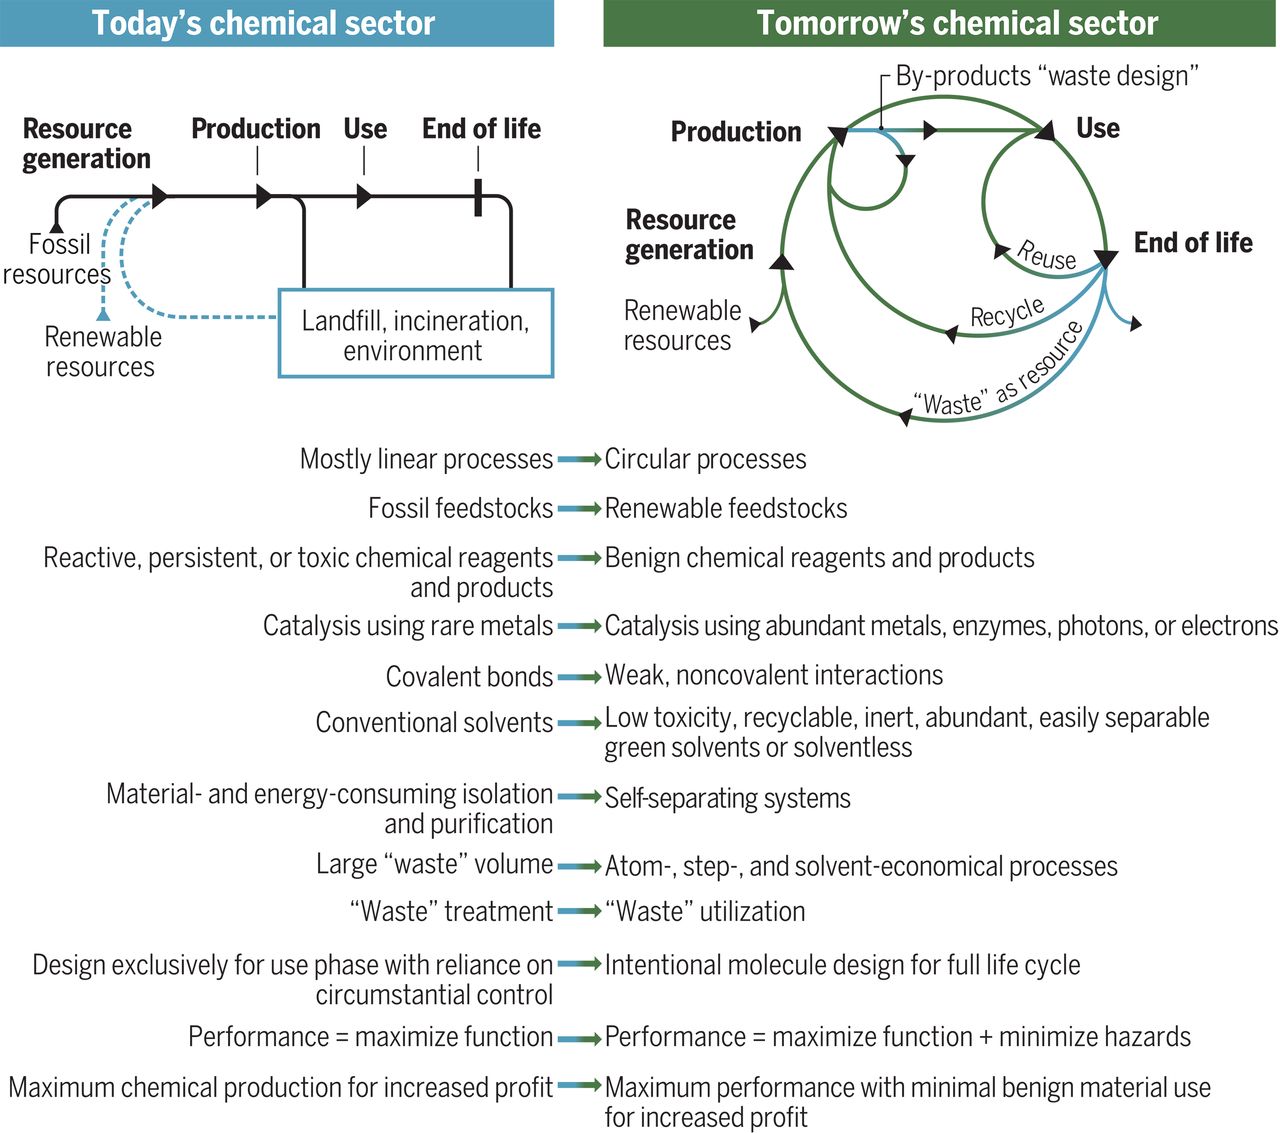 Image showing a comparison between today's chemical sector and tomorrow's chemical sector.